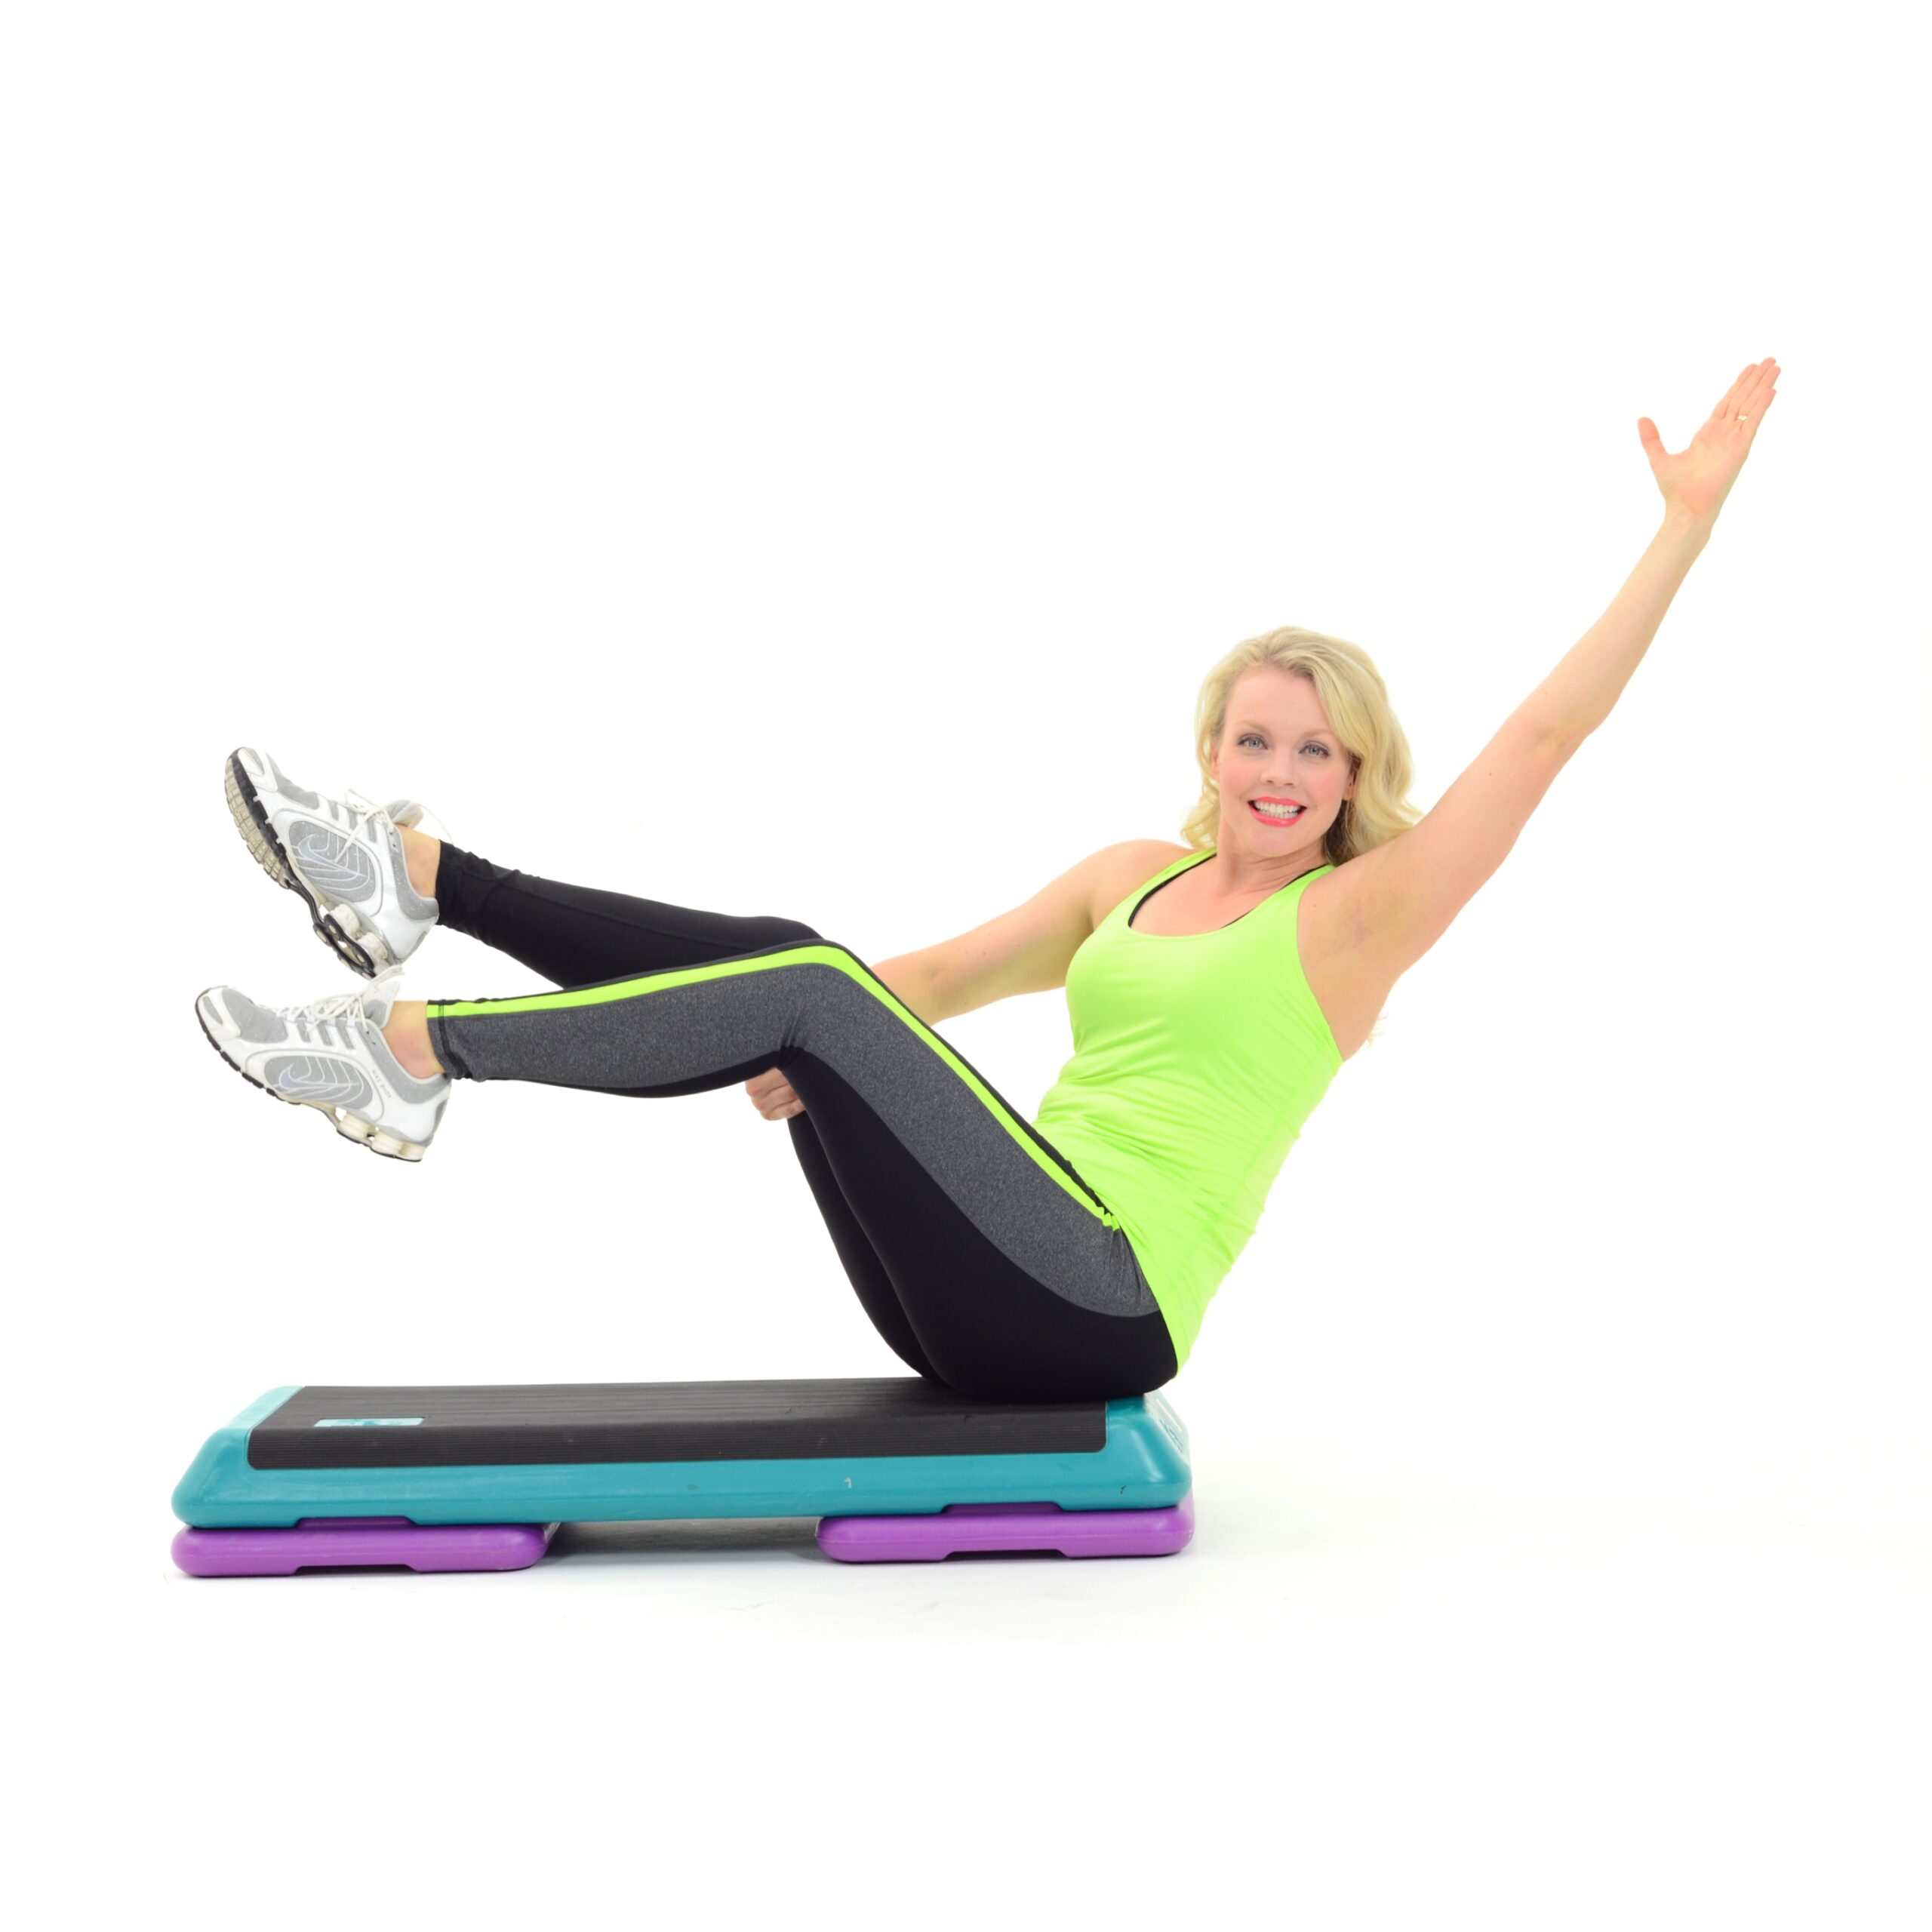 Step Aerobics Benefits And Beginner Exercises To Get You Started - GoodRx